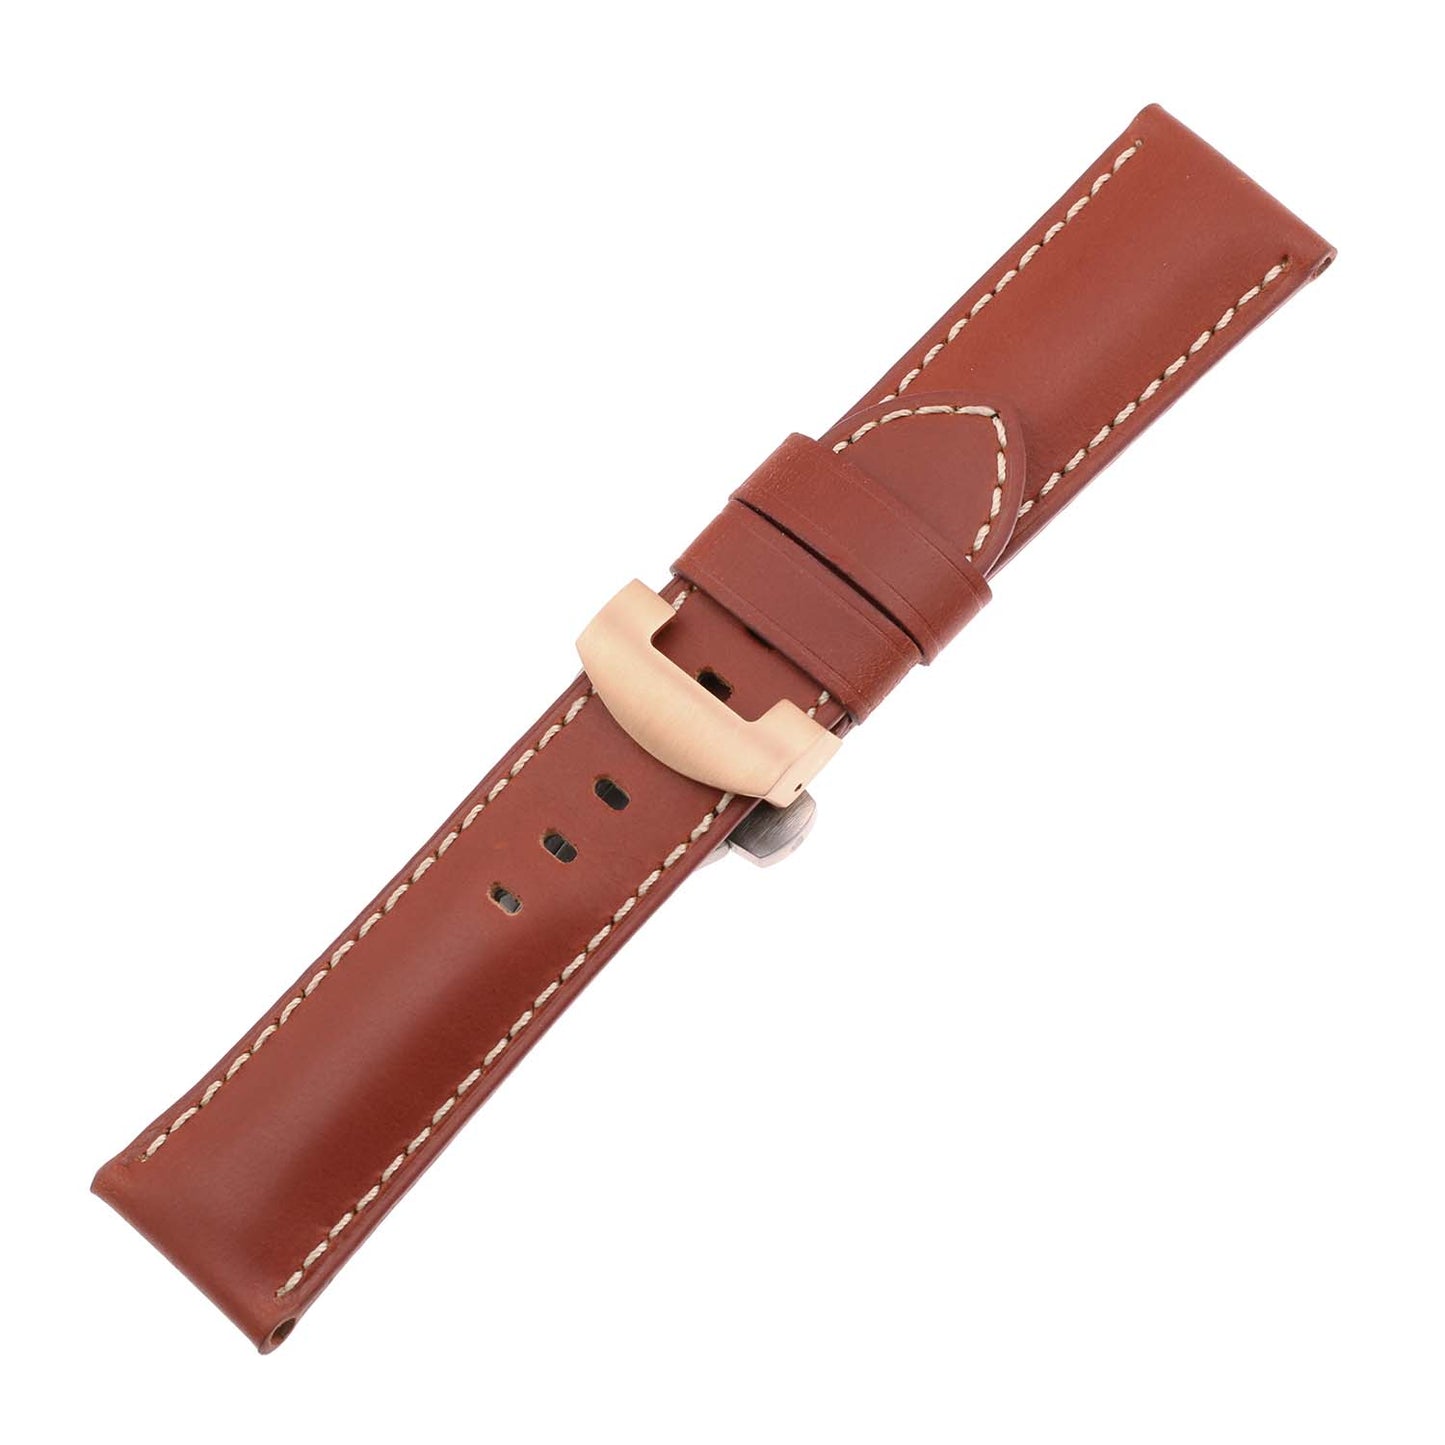 DASSARI Smooth Leather Strap w/ Deployant Clasp (Standard, Long) for OnePlus Watch